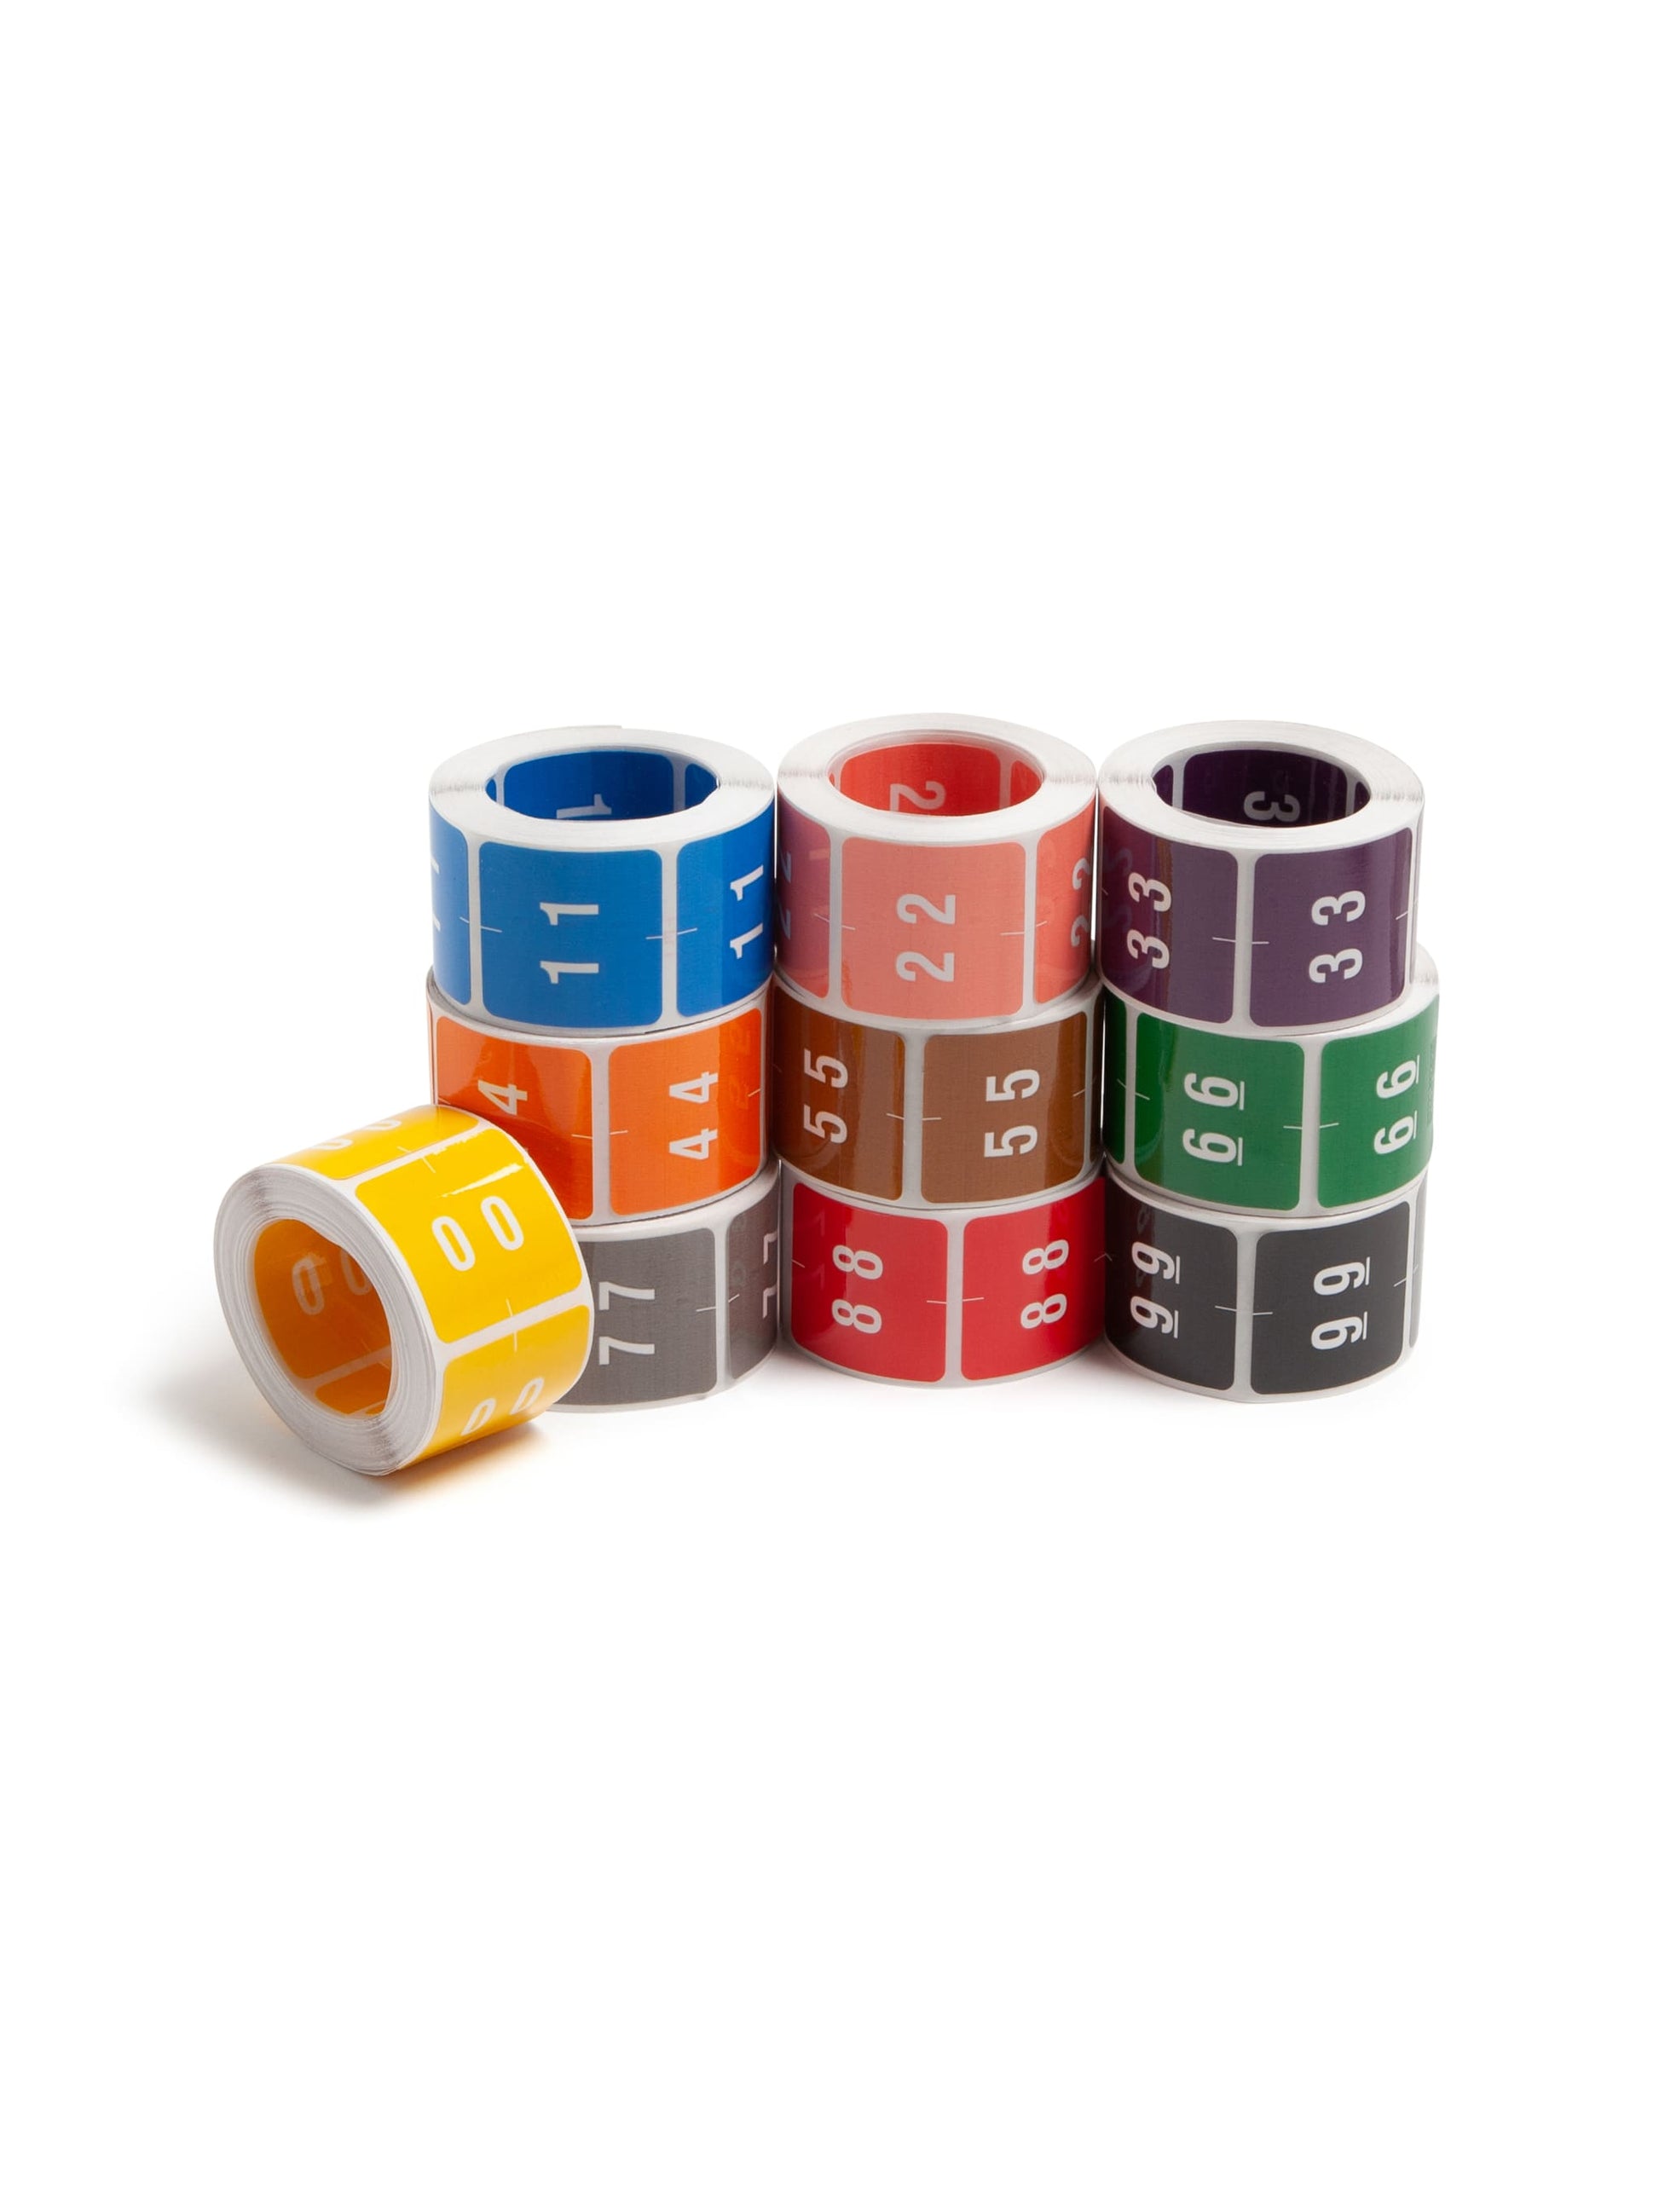 DCC Color-Coded Numeric Labels - Rolls, Assorted Colors Color, 1-1/2" X 1-1/2" Size, Set of 1, 086486674300